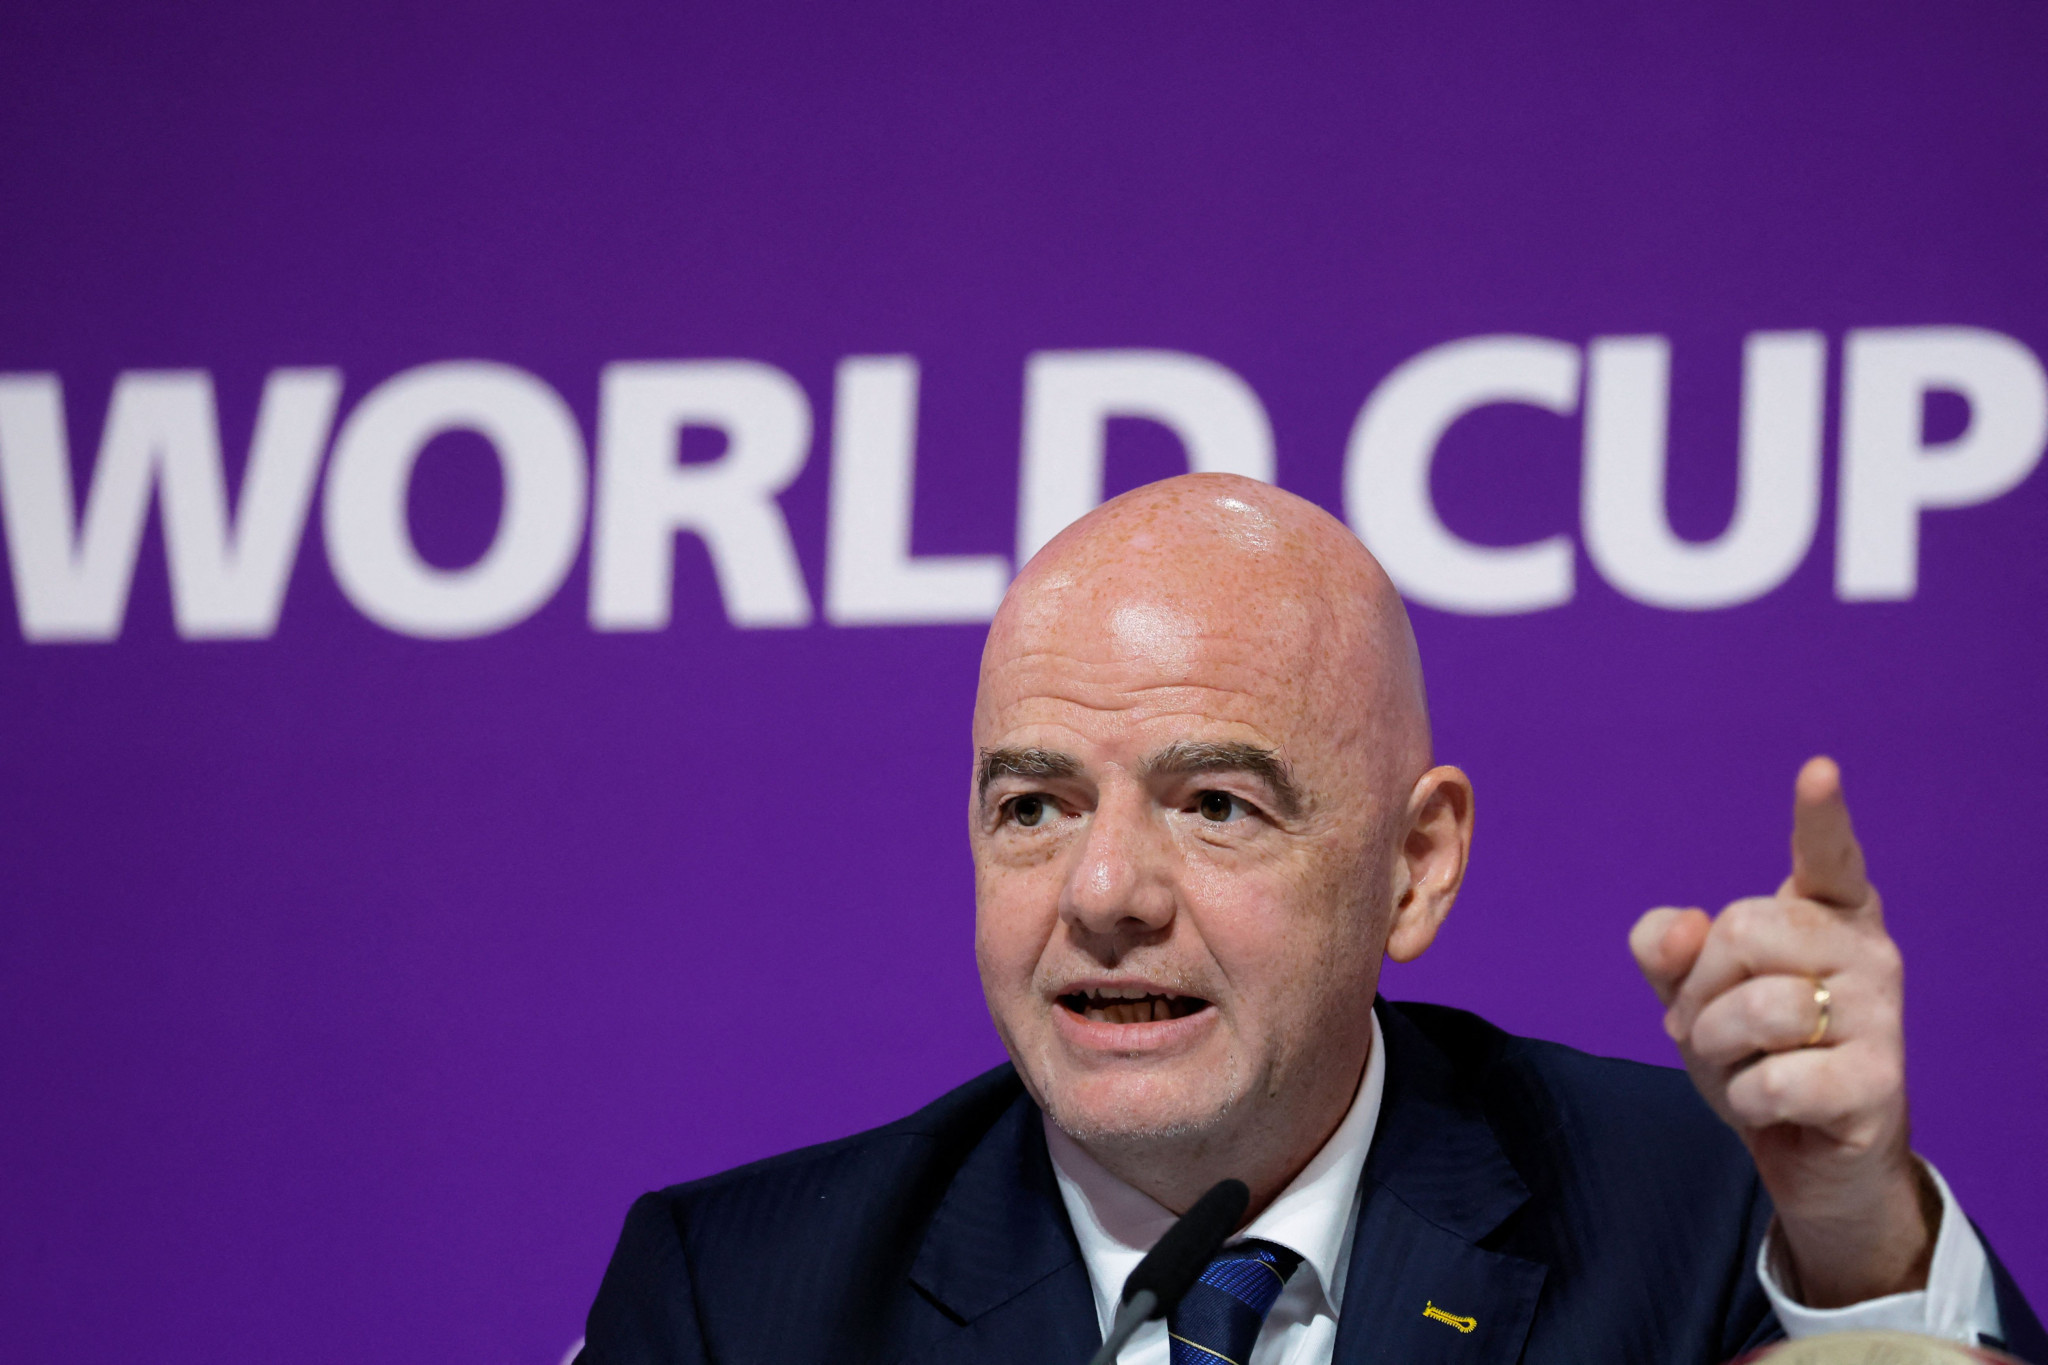 Infantino could lead FIFA until 2031 as Council says first 39 months did not count towards term limits